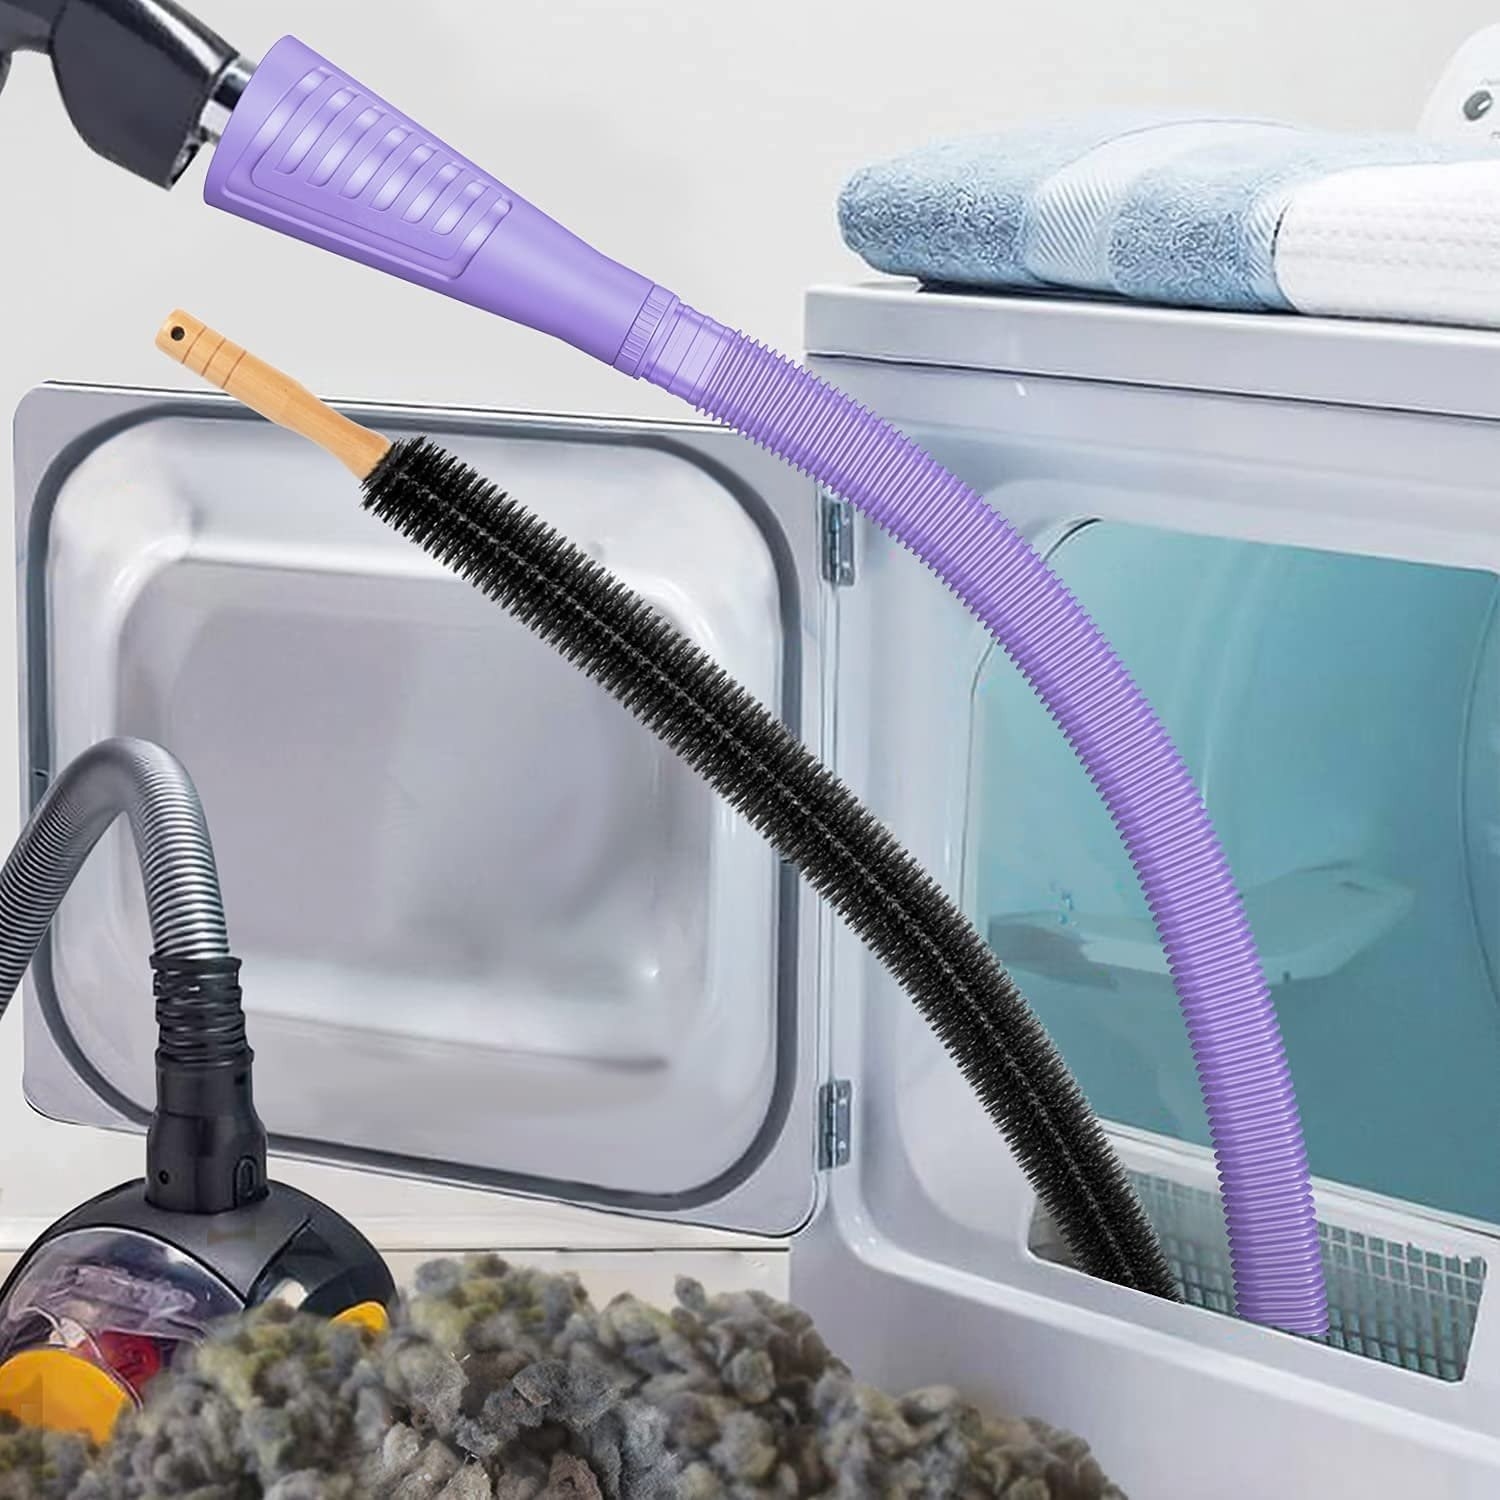 The purple dryer vent cleaning kit being used with a vacuum